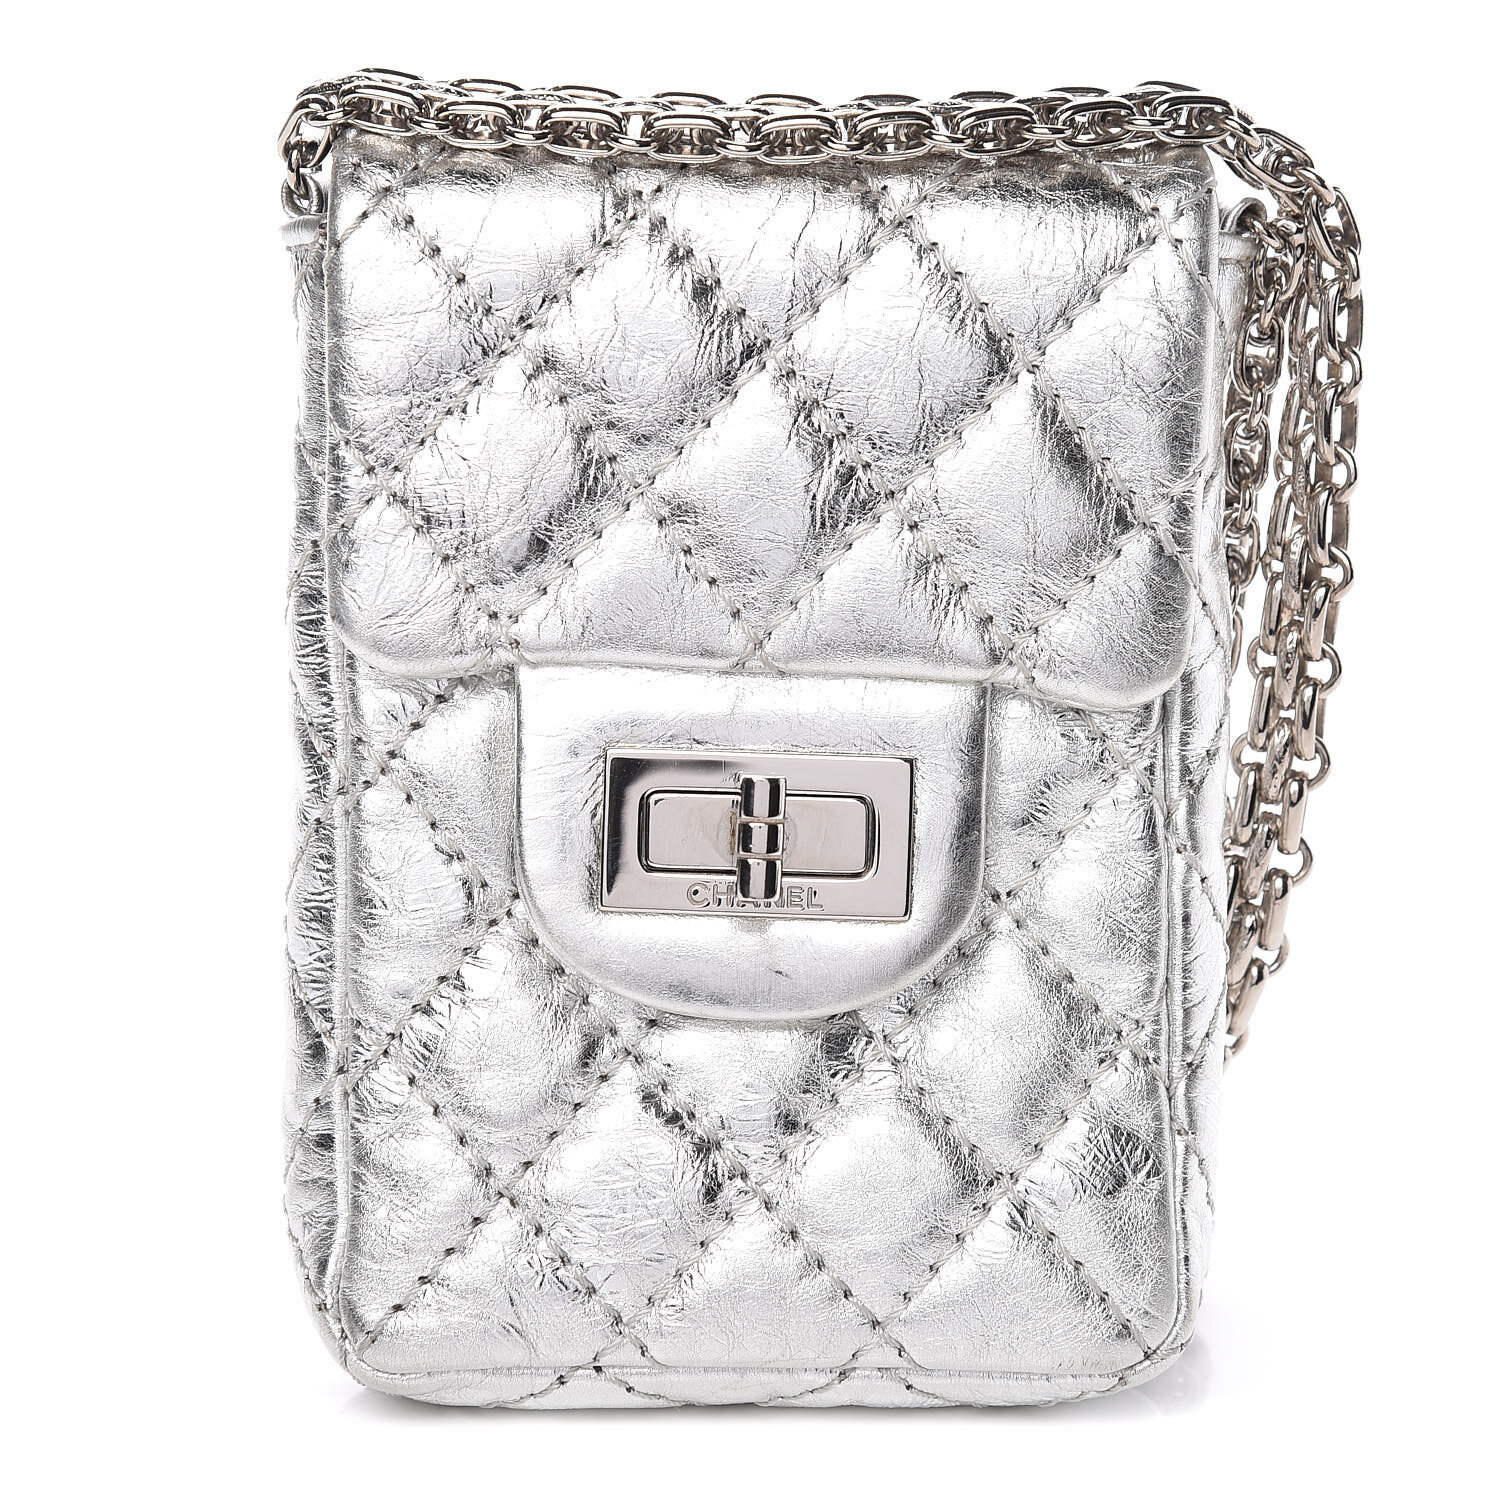 Chanel 2.55 Reissue Phone Case in Quilted Silver Aged Calfskin Leather.jpg